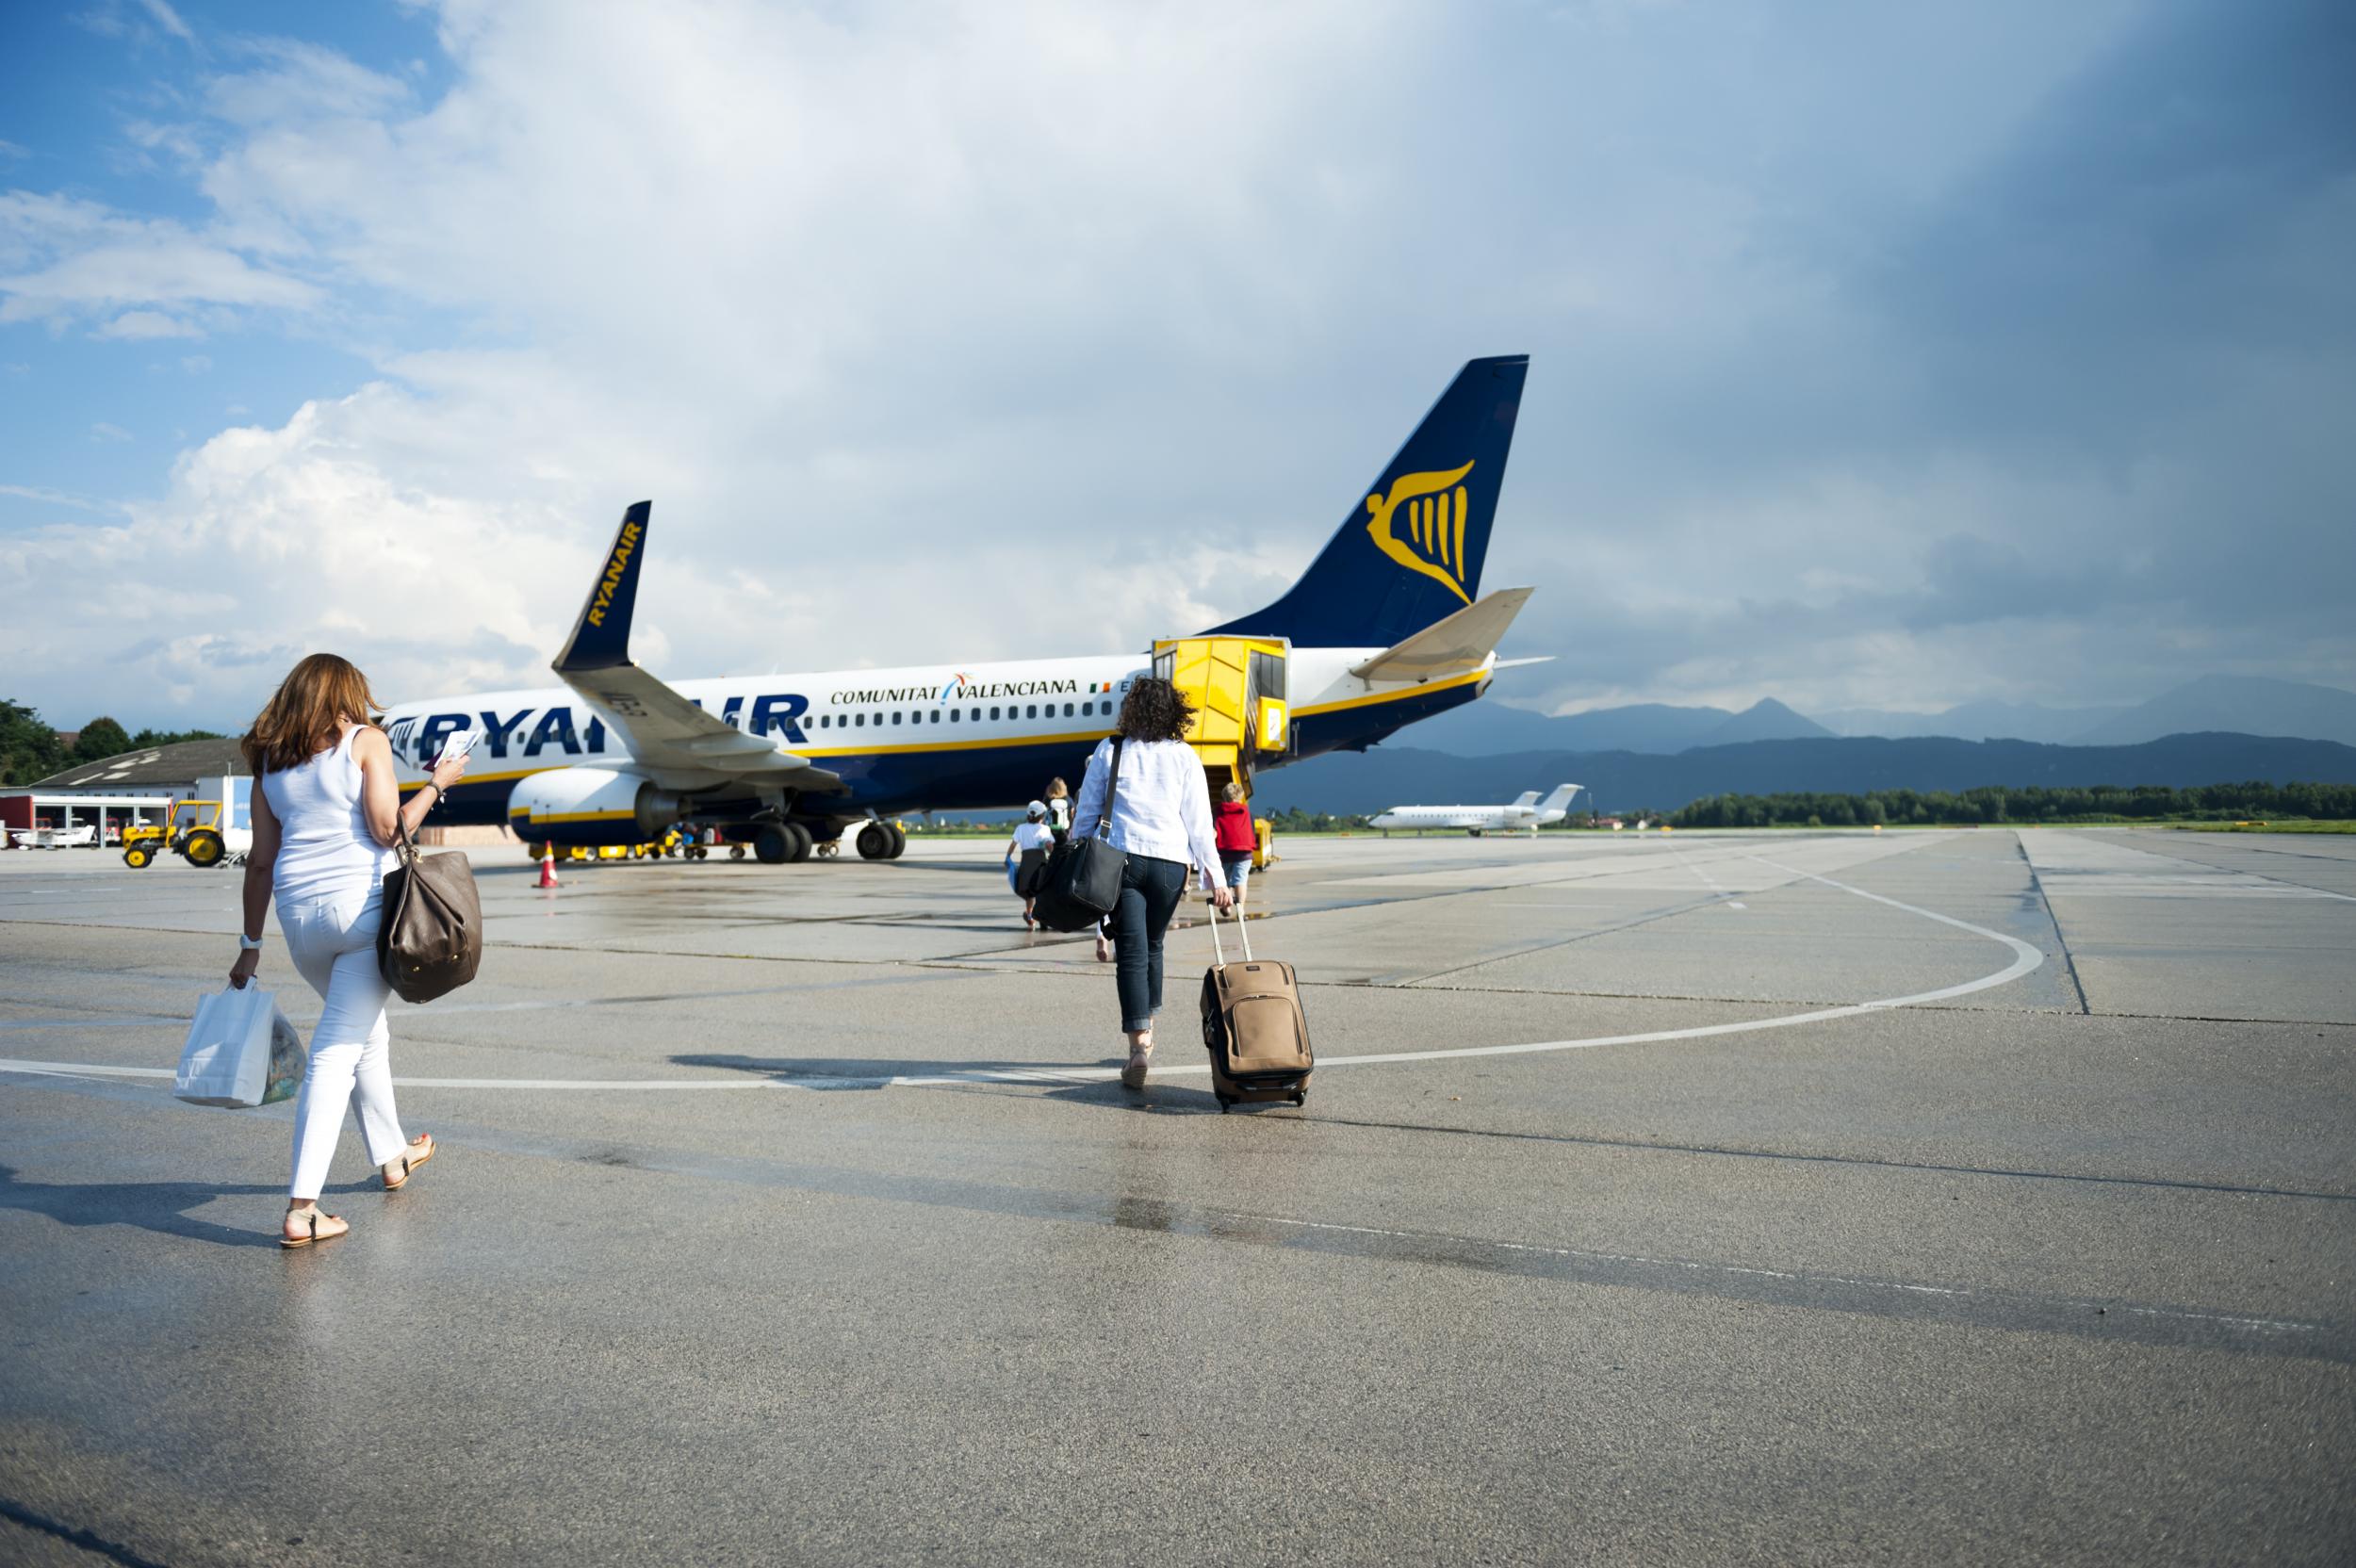 Ryanair flights could be disrupted by more strikes